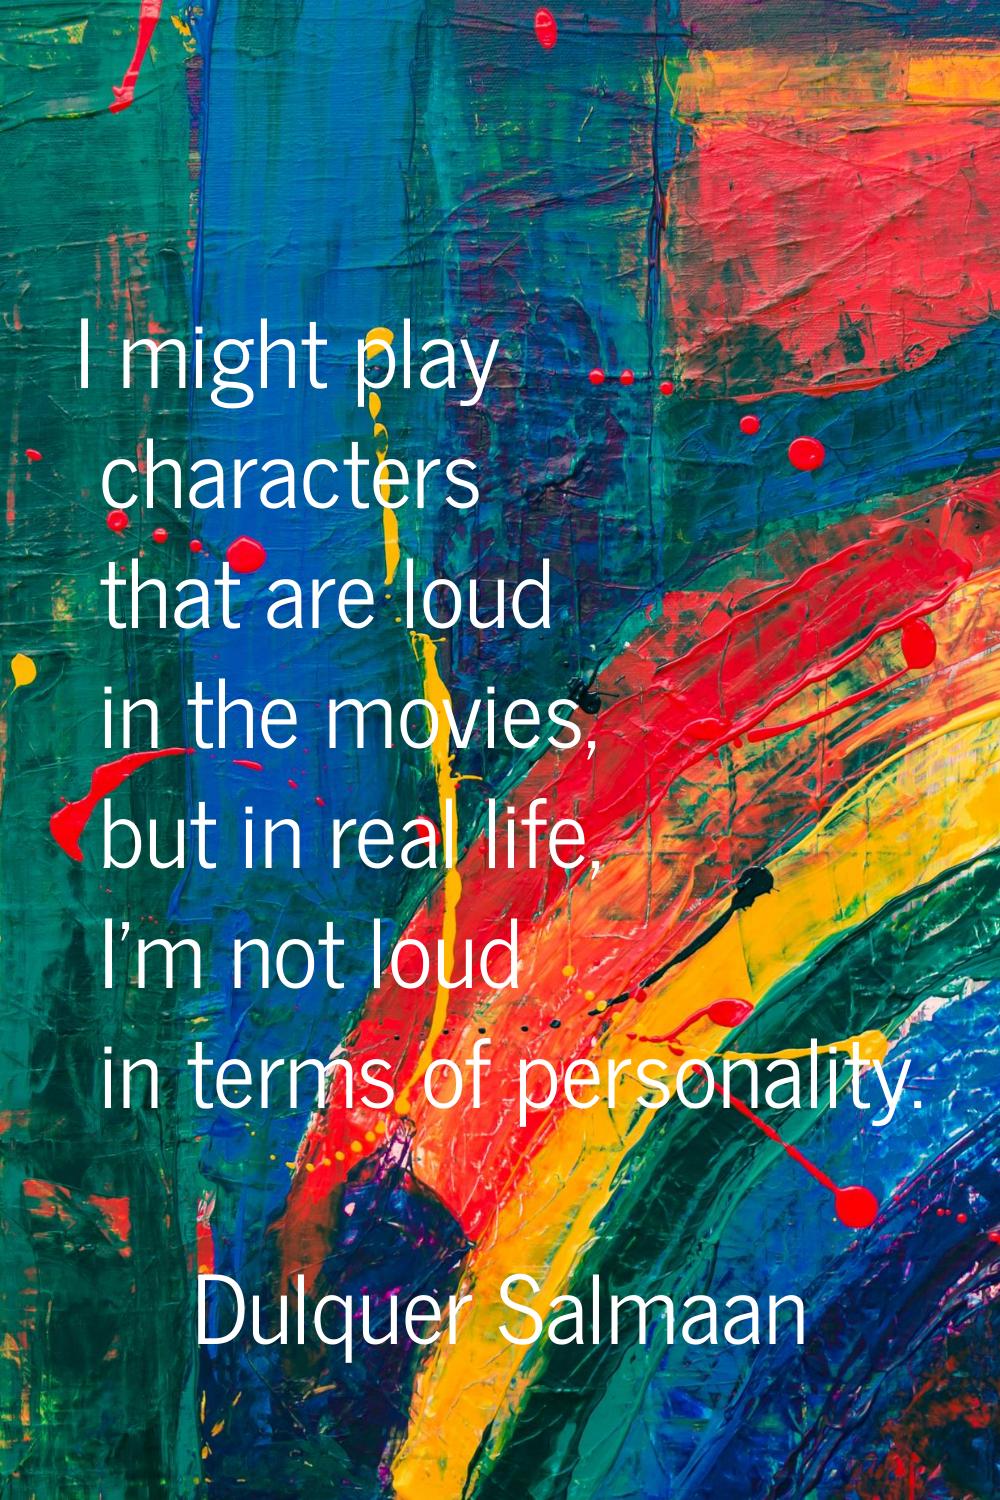 I might play characters that are loud in the movies, but in real life, I'm not loud in terms of per